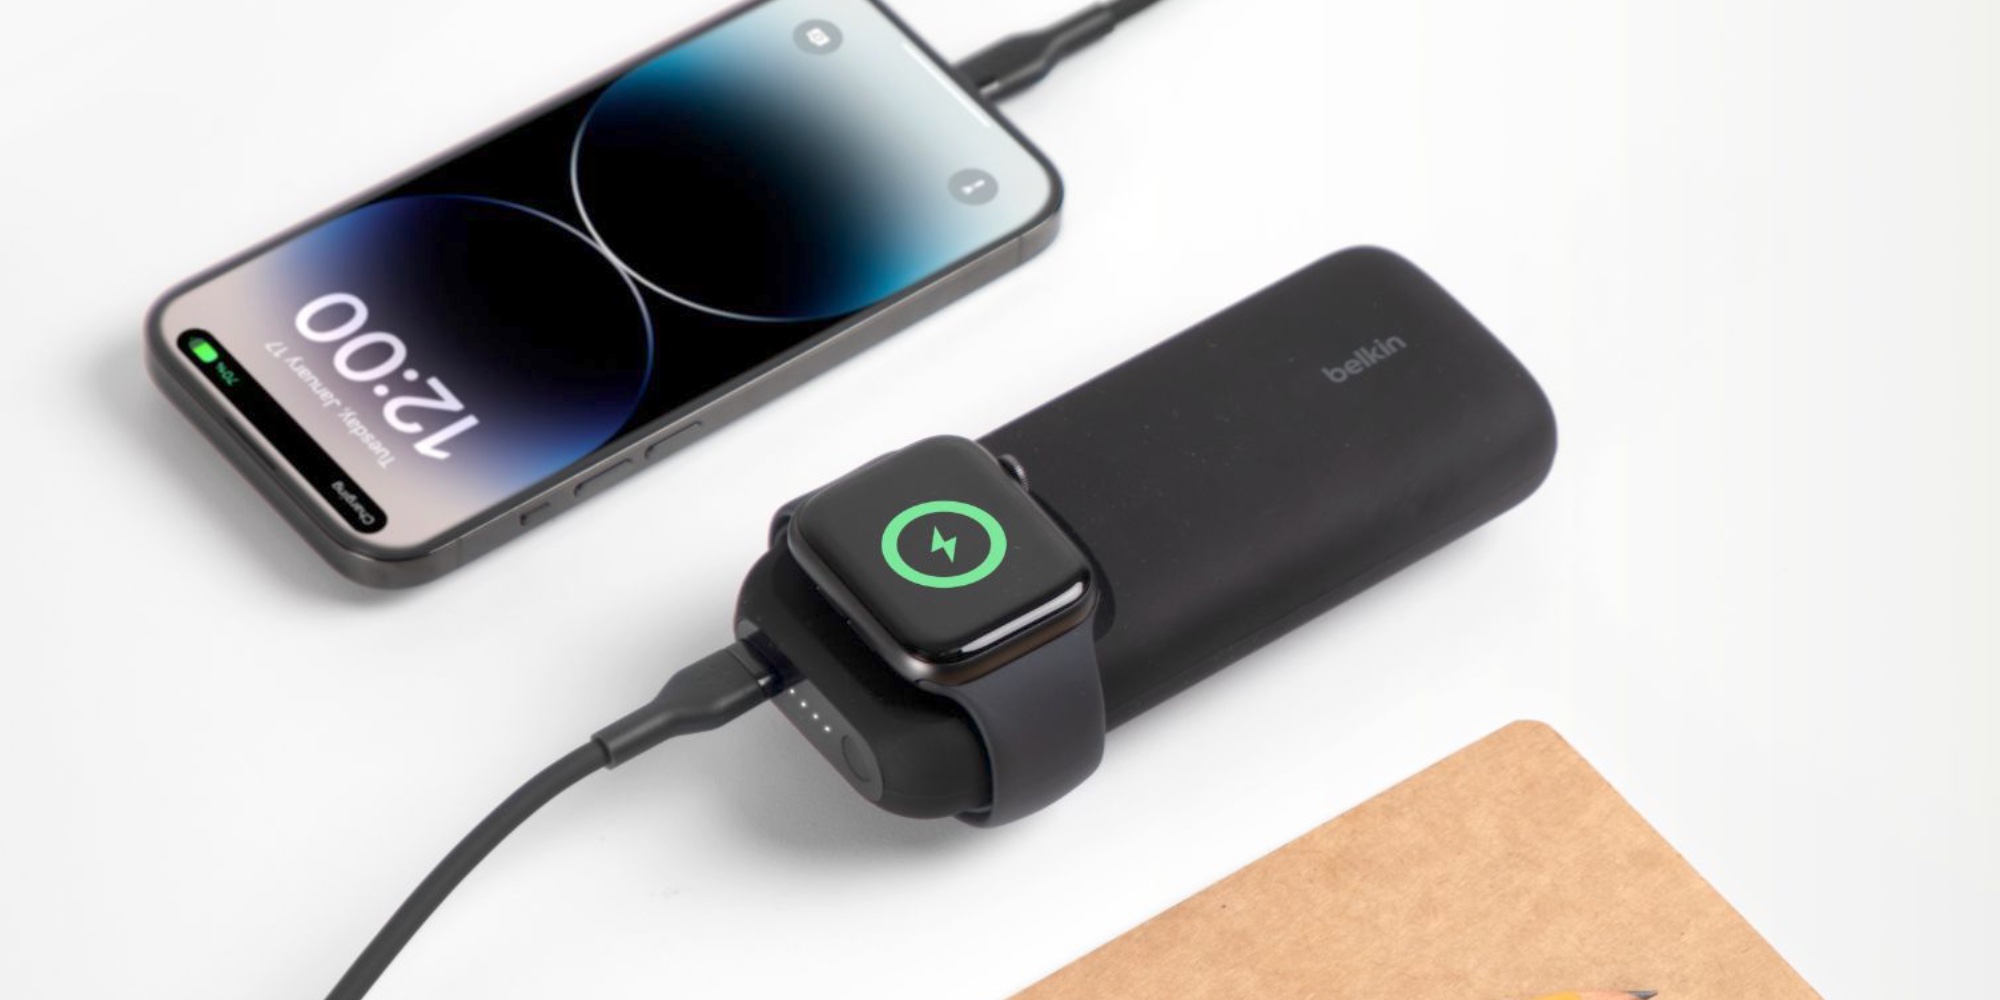 Belkin launches new 3-in-1 stand that fast charges Apple Watch - 9to5Mac